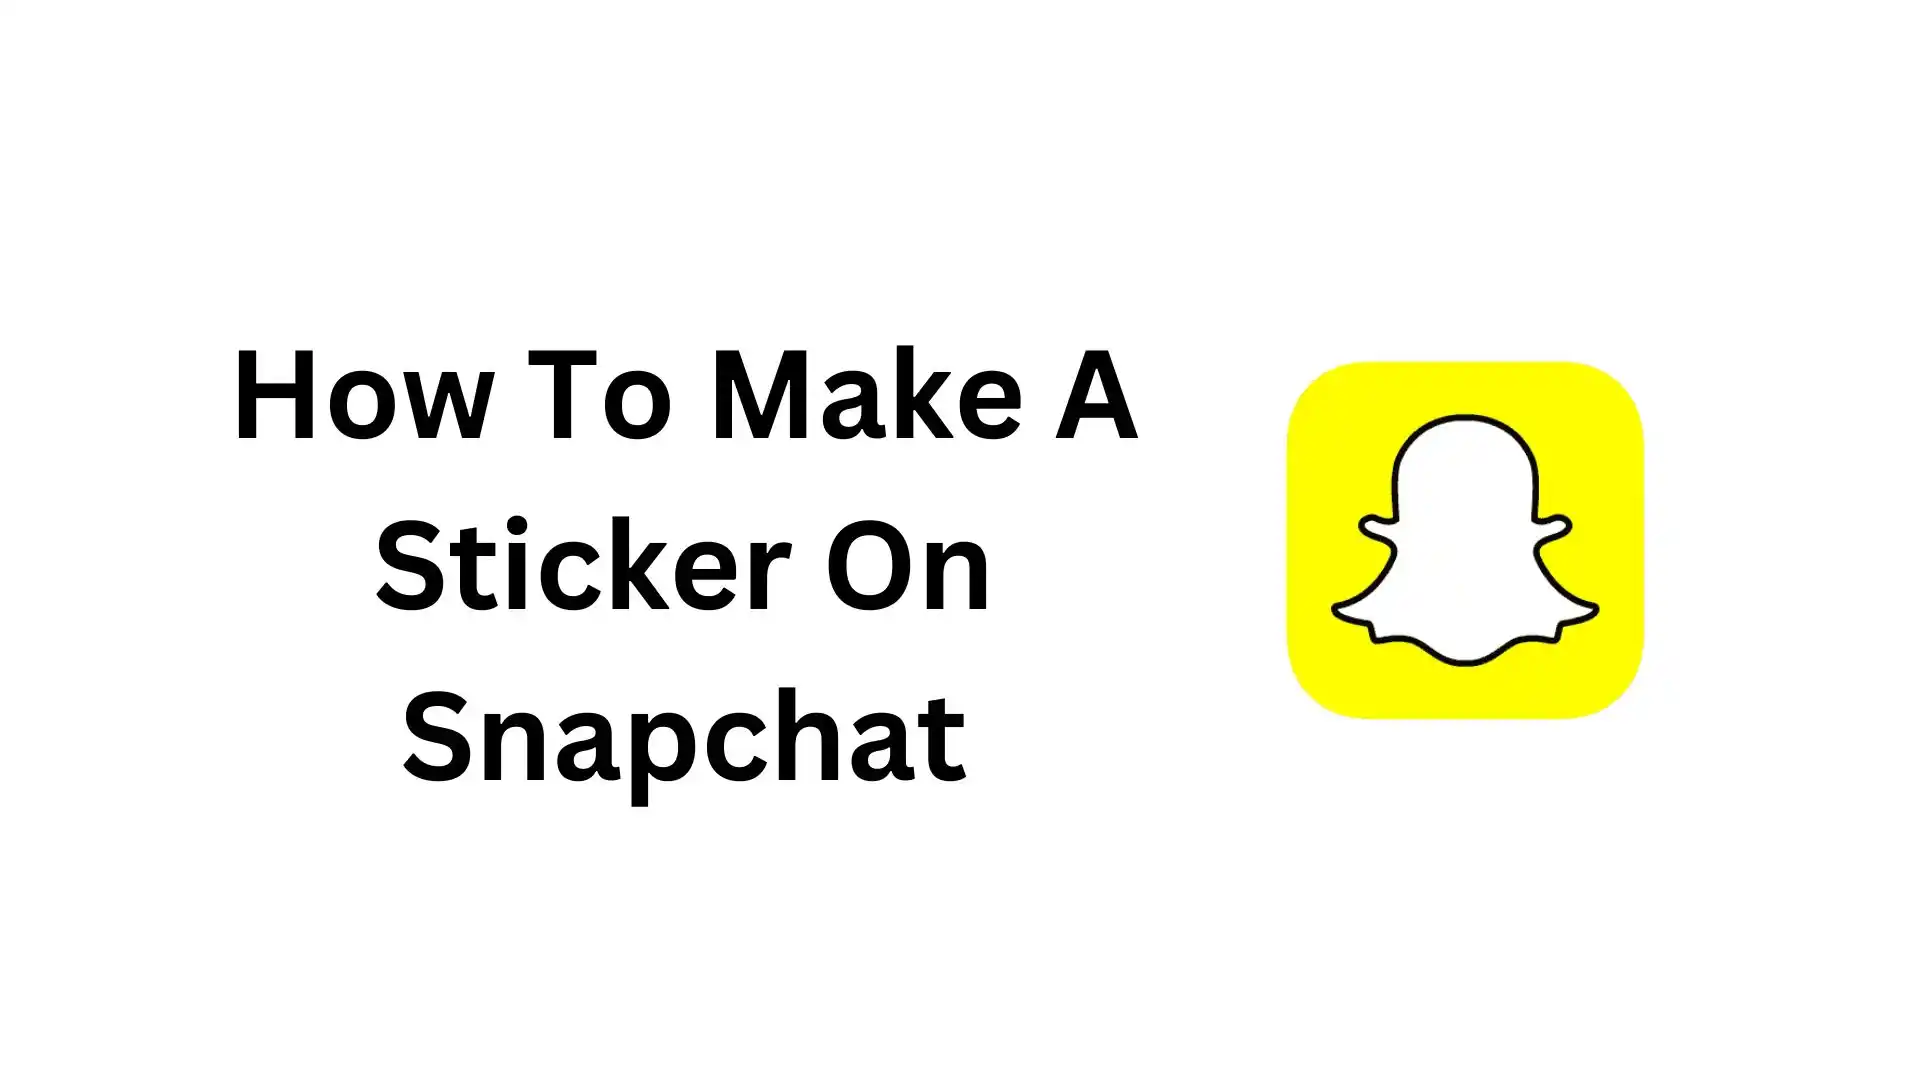 How To Make A Sticker On Snapchat: Quick Guide